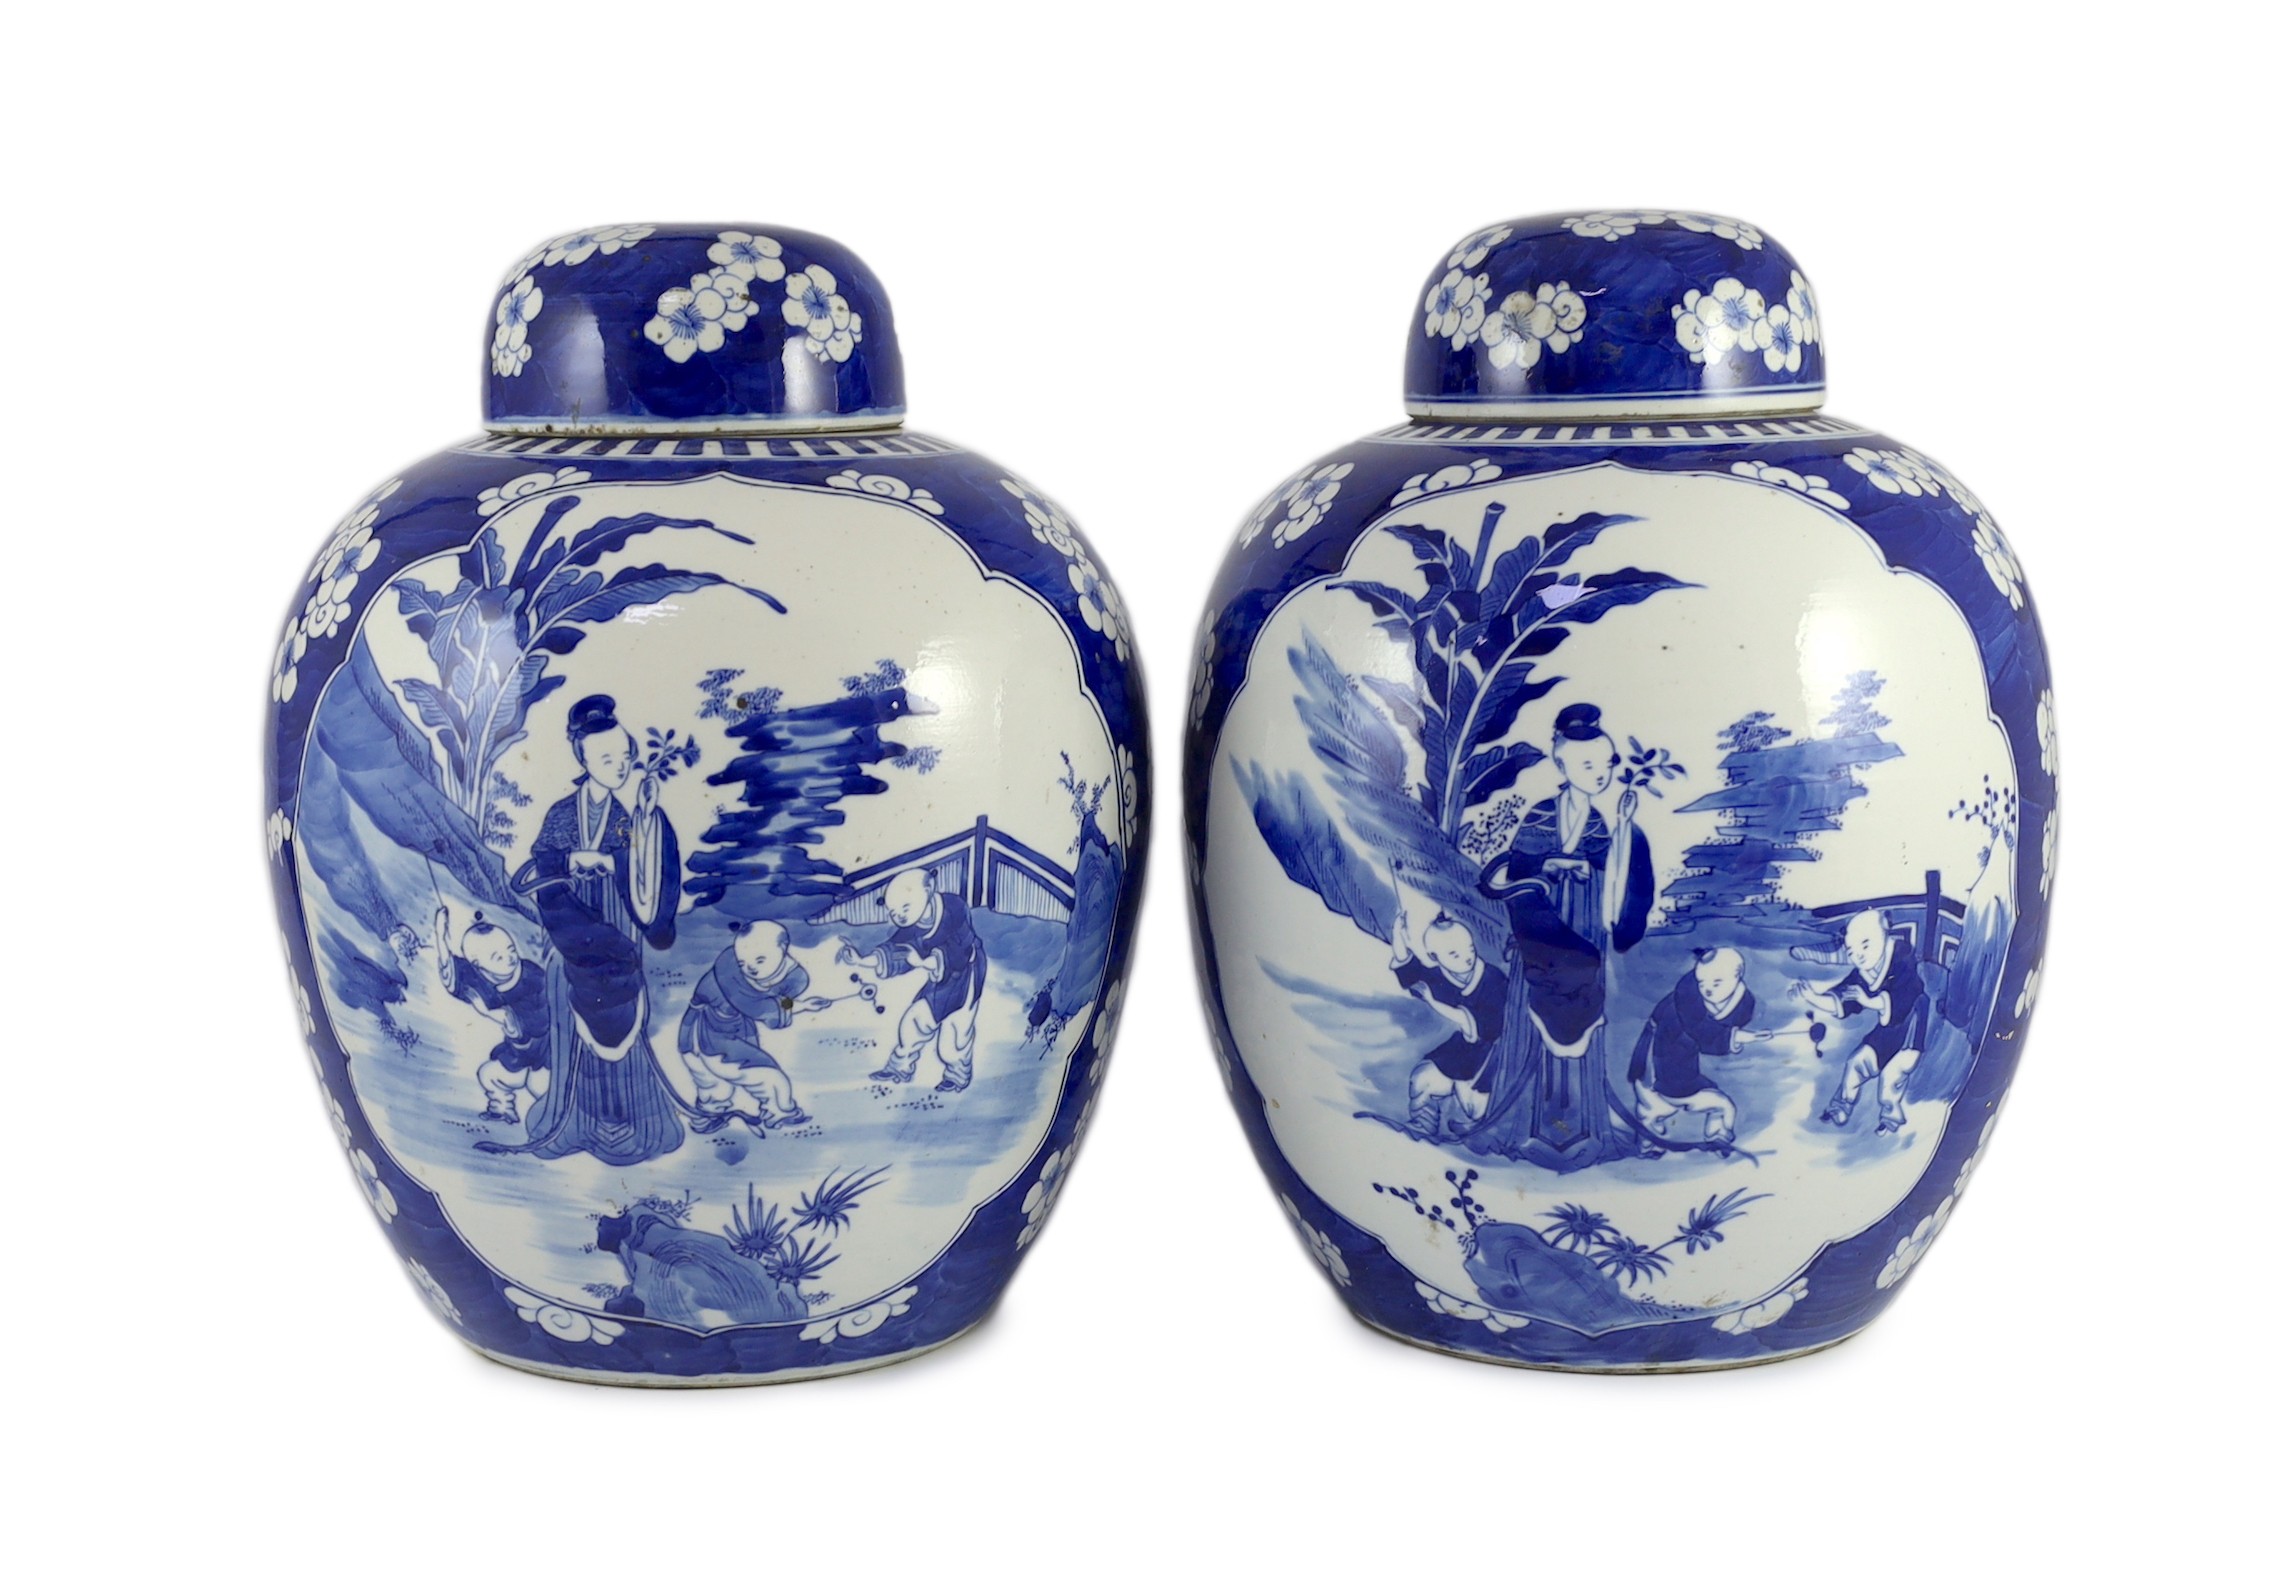 A pair of large Chinese blue and white jars and covers, 19th century, 33cm high                                                                                                                                             